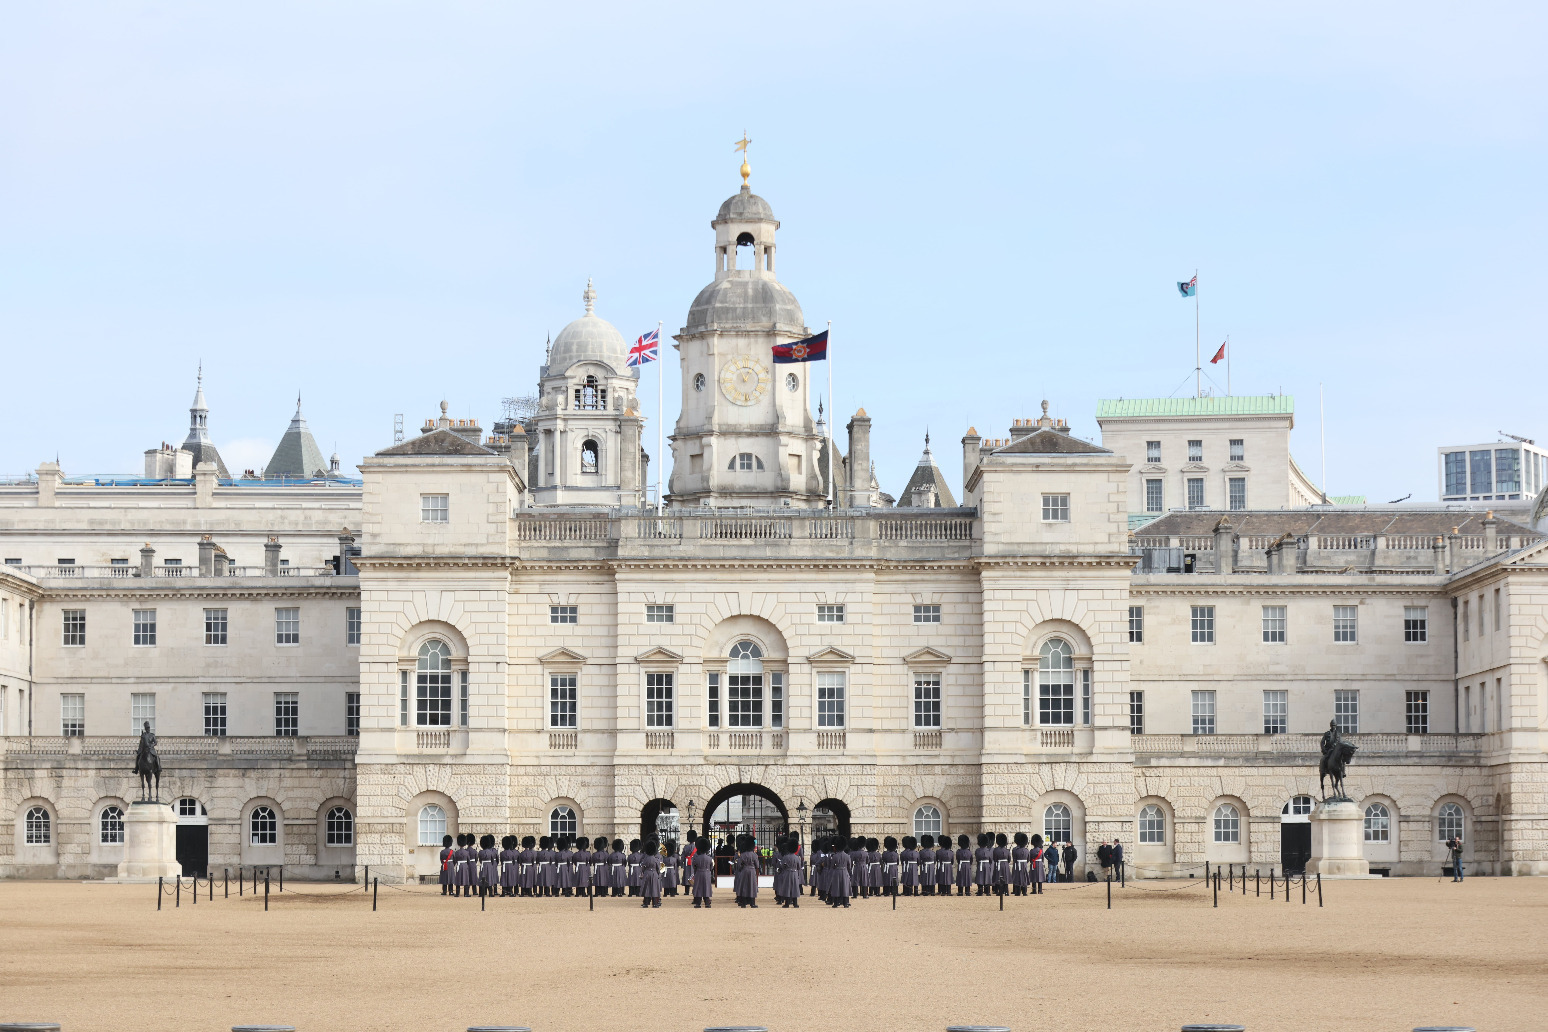 Man due in court after incident in Horse Guards Parade